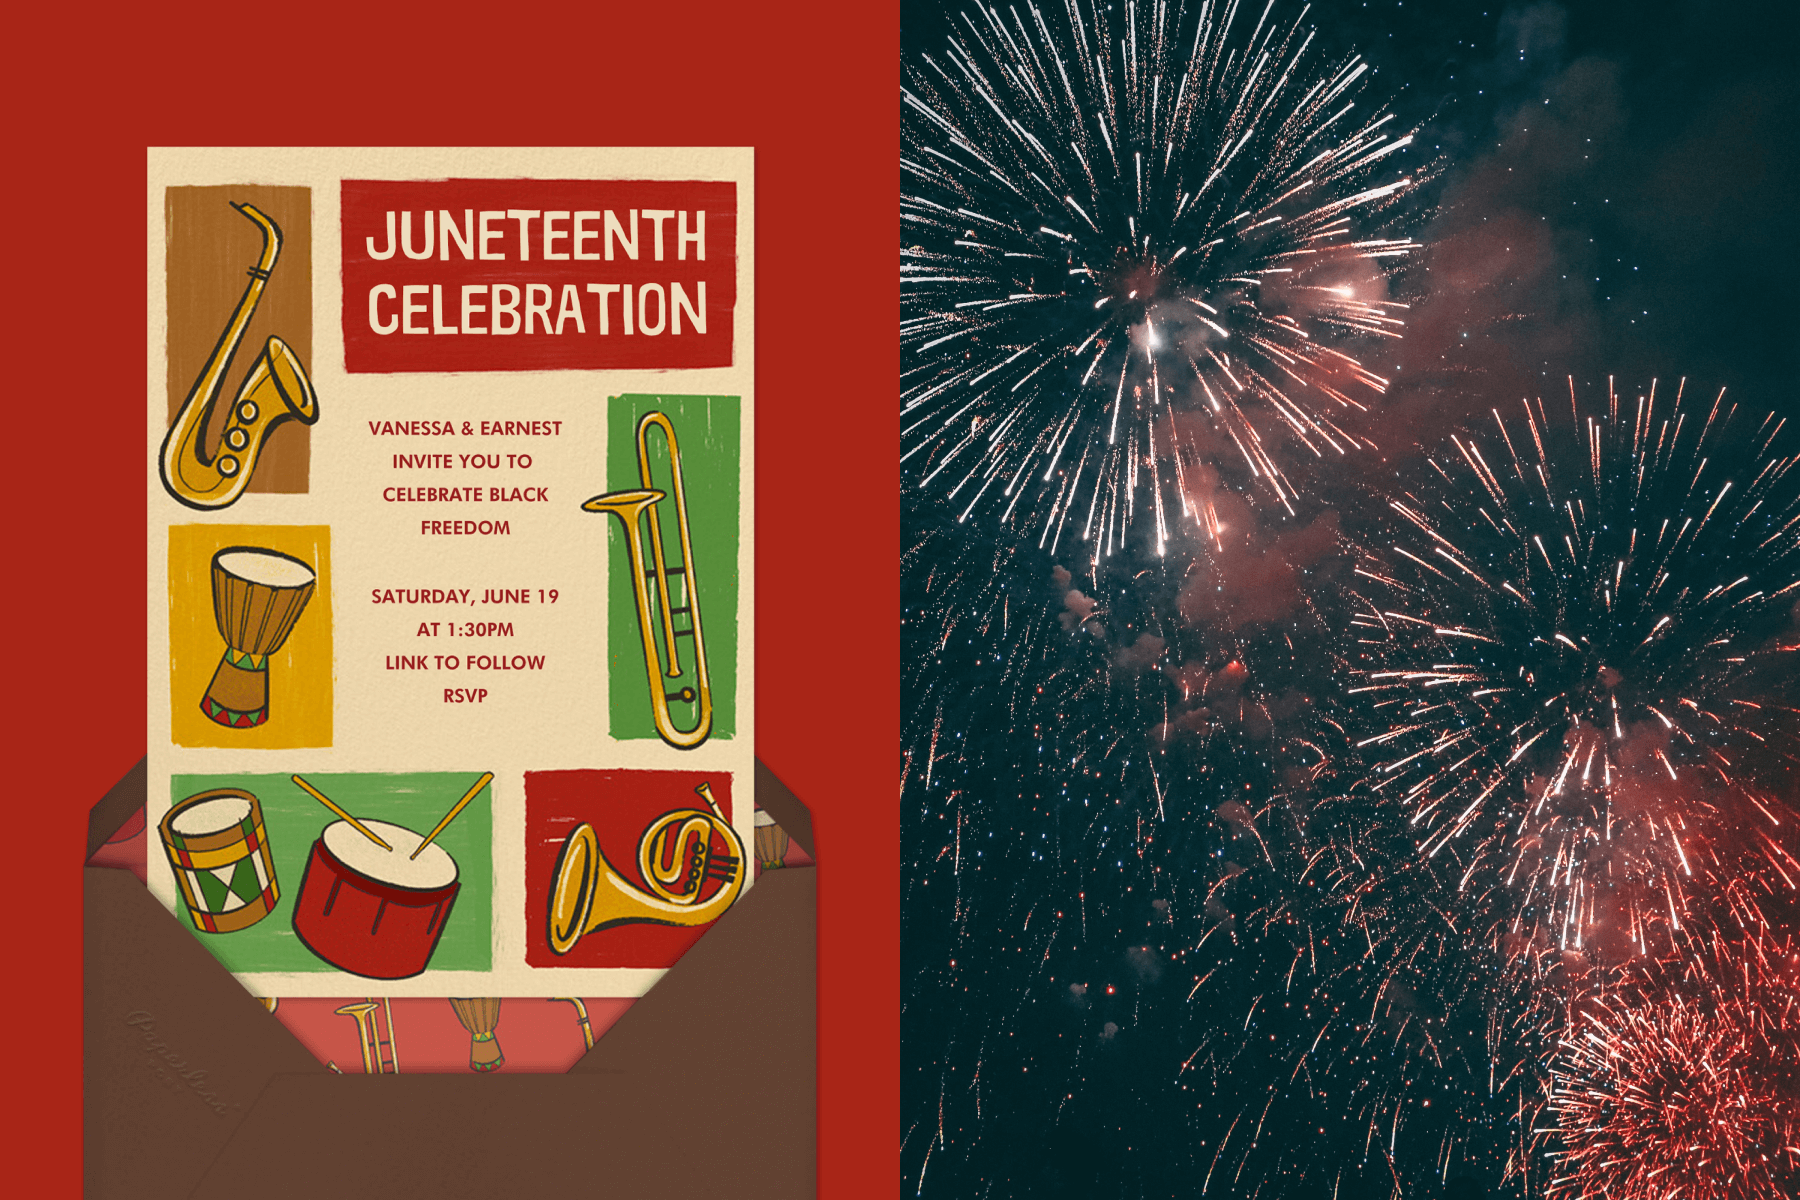 Left: A Juneteenth invitation featuring musical instruments; Right: Fireworks at night.